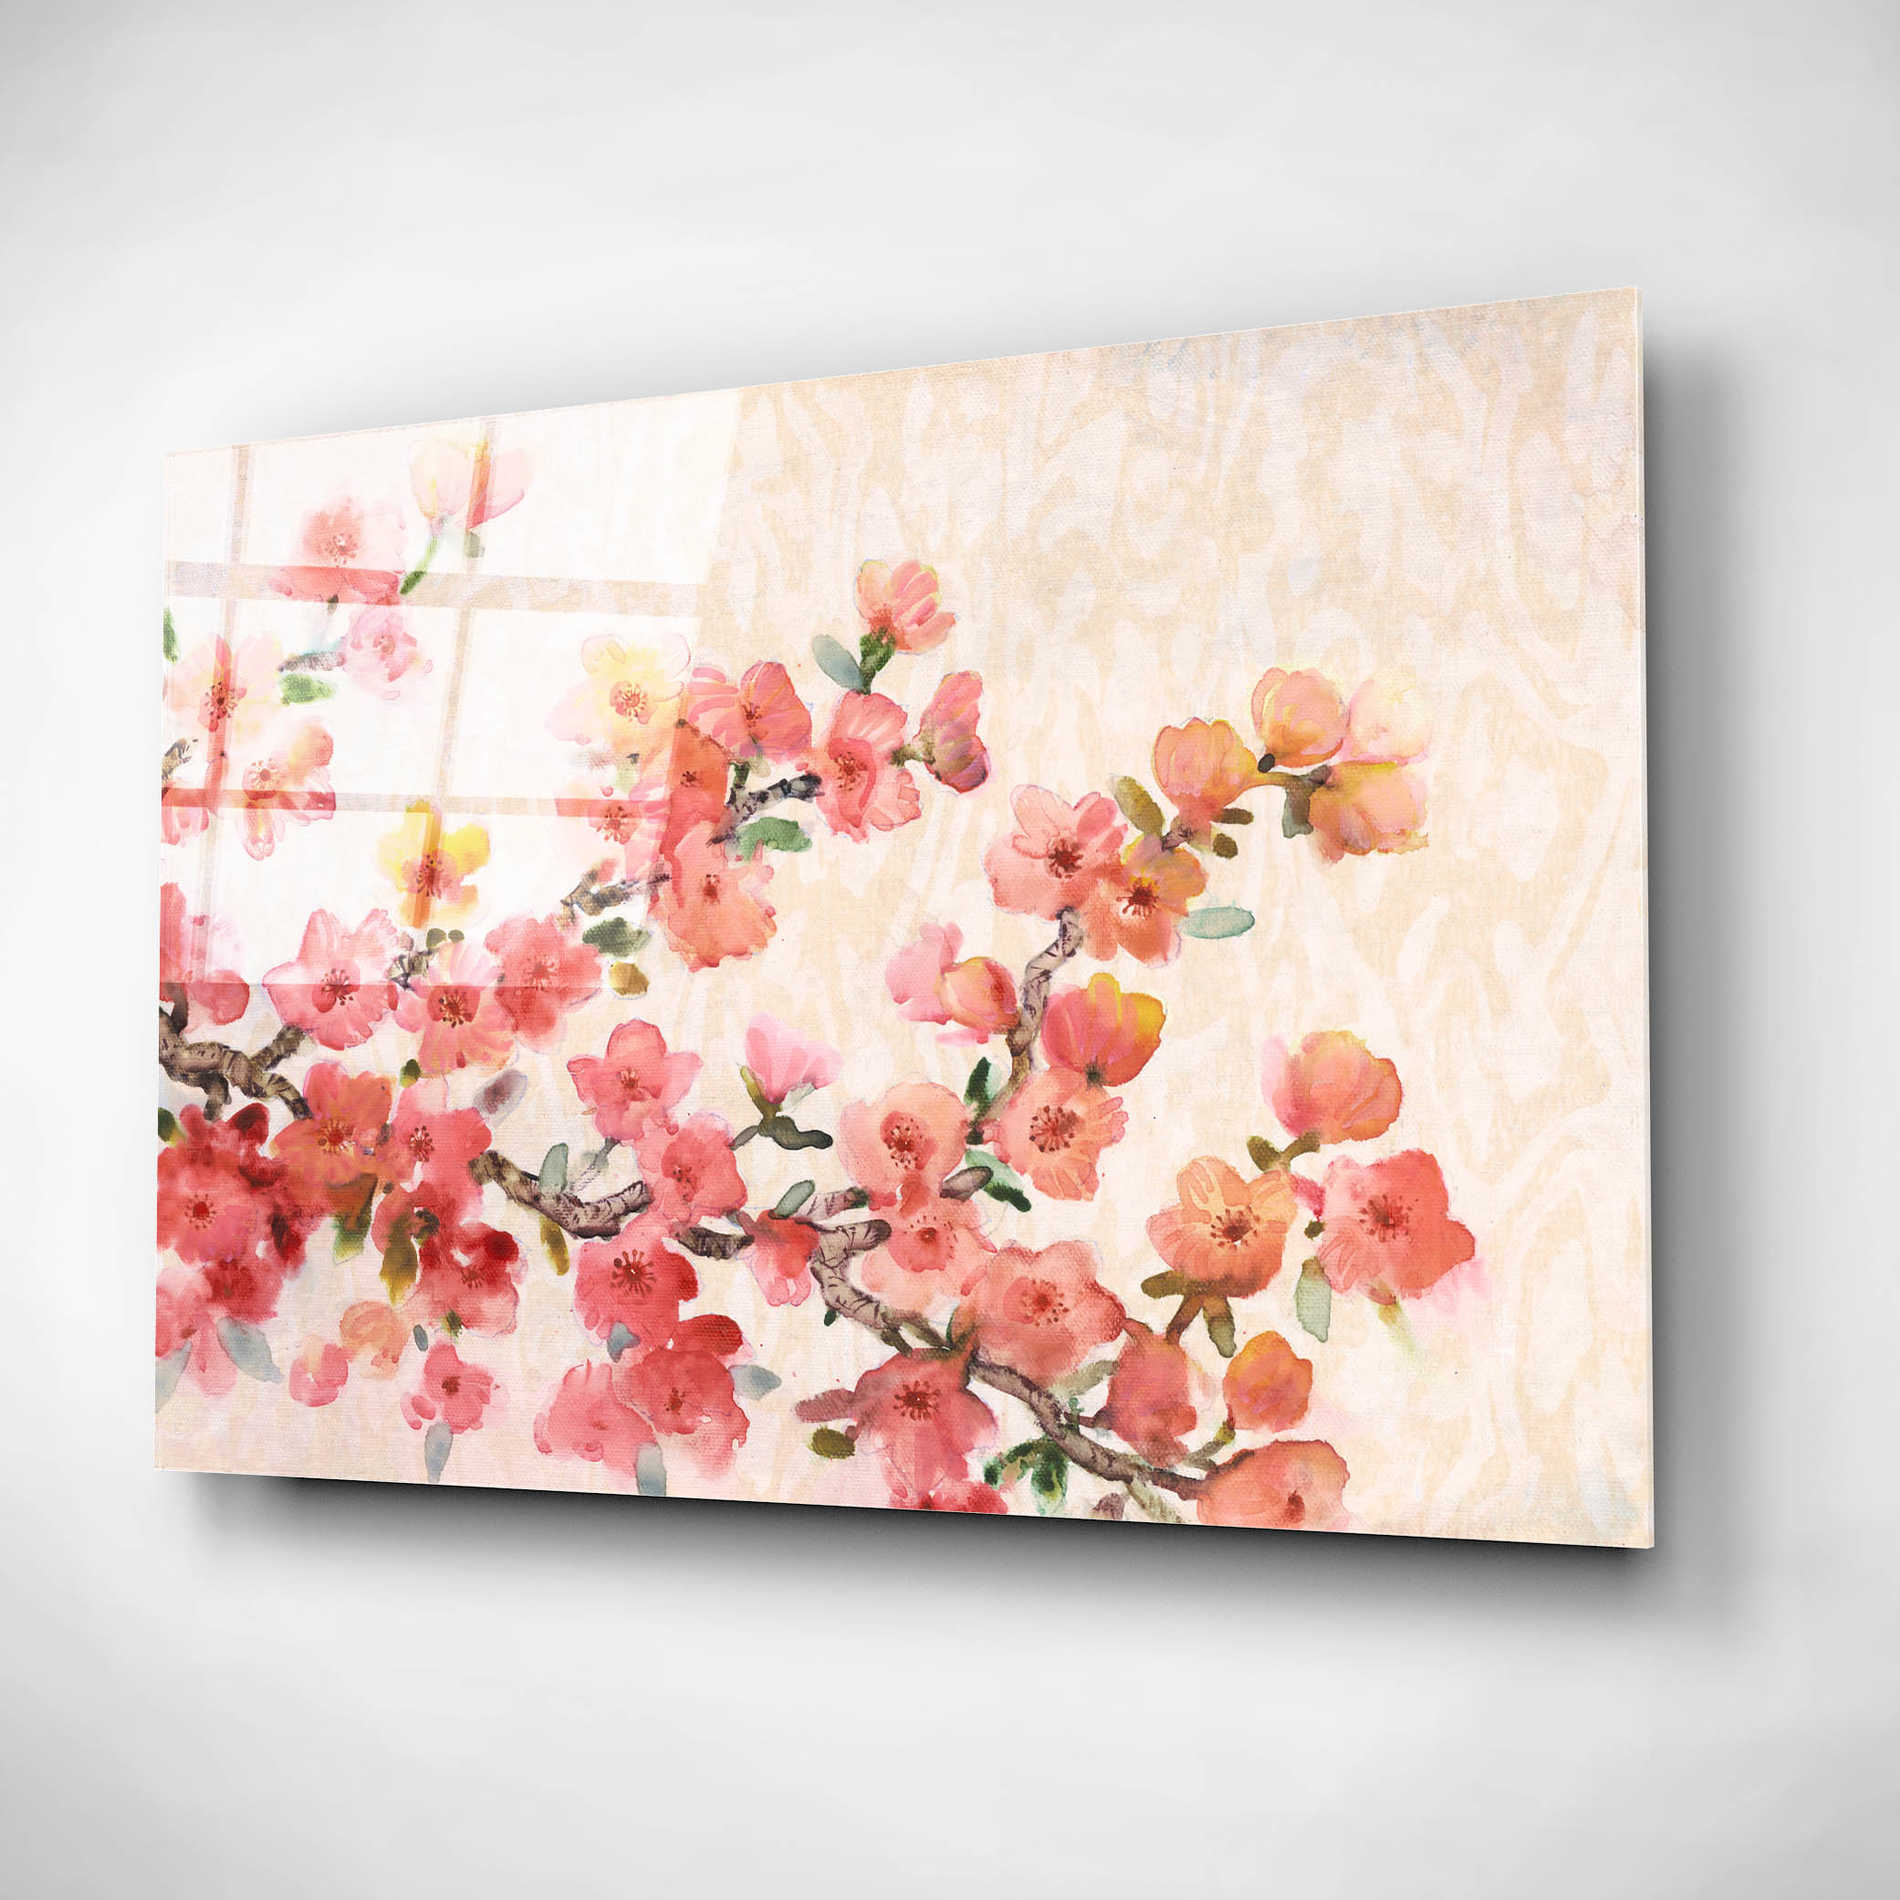 Epic Art 'Cherry Blossom Composition II' by Tim O'Toole, Acrylic Glass Wall Art,24x16